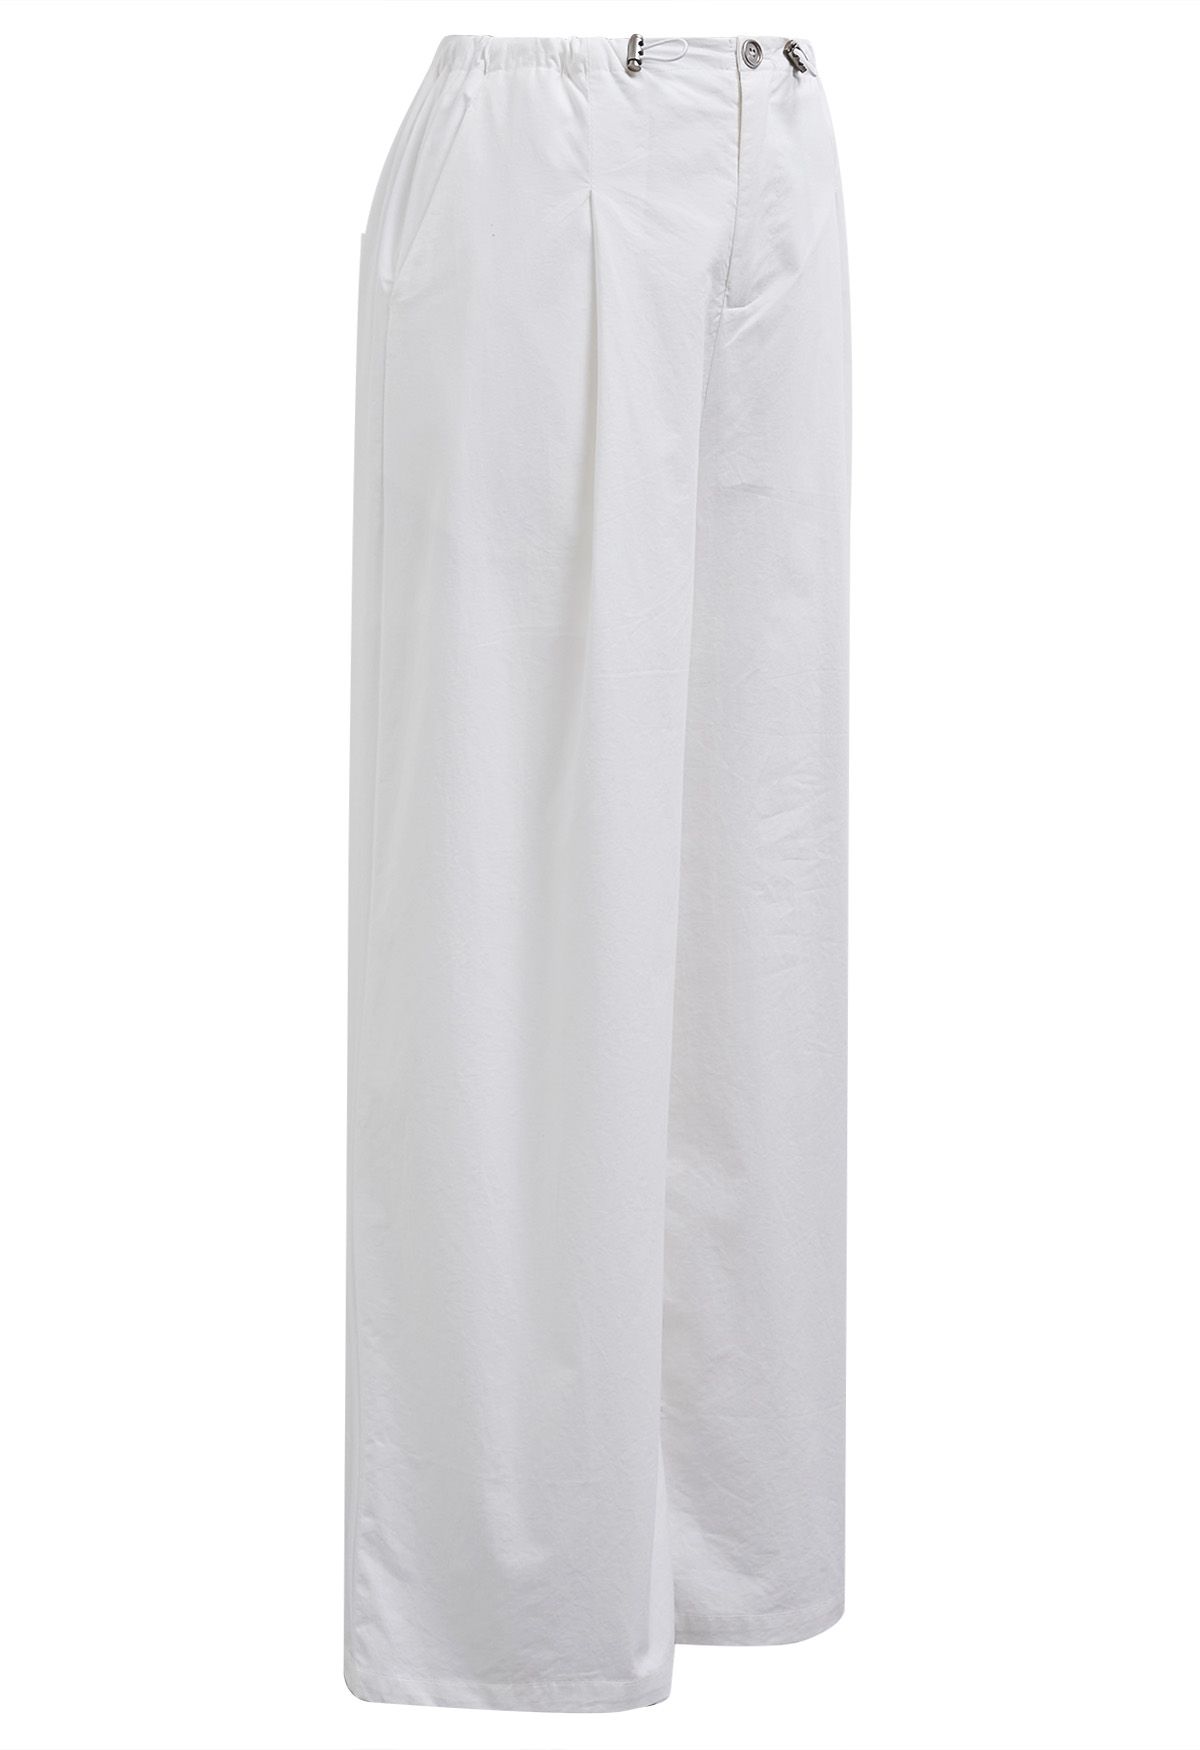 Relaxed Fit Drawstring Waist Wide-Leg Pants in White